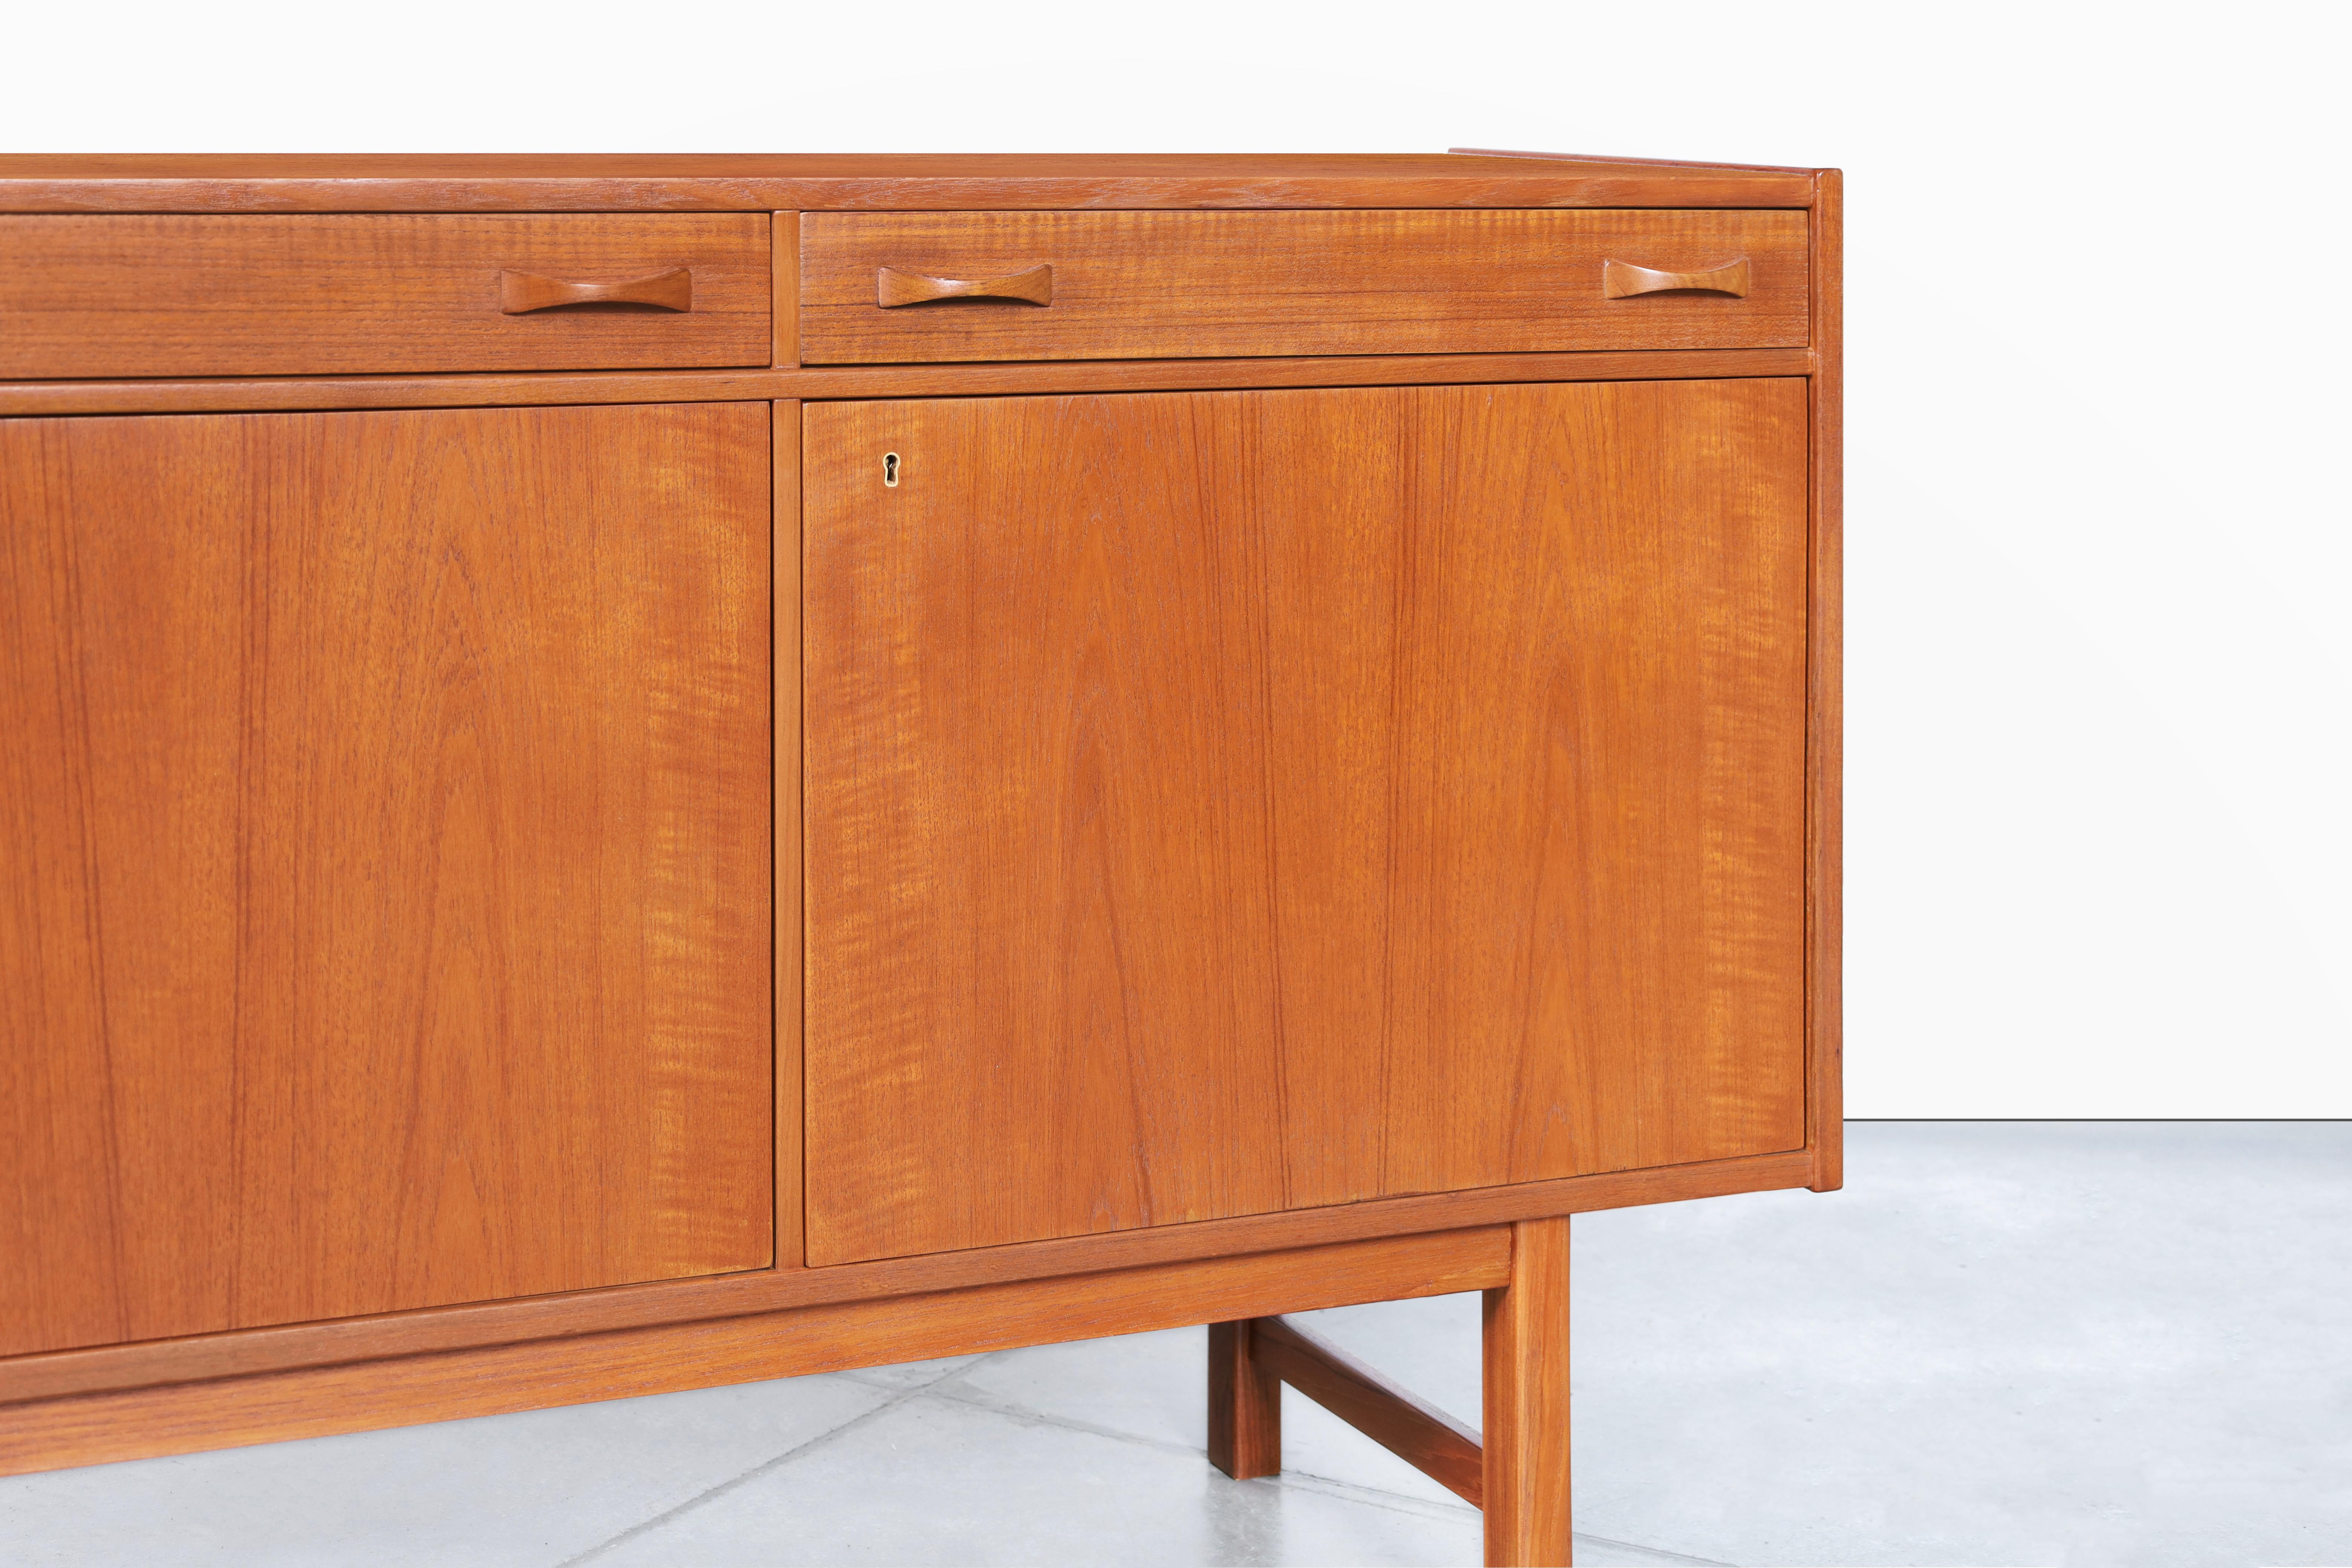 Swedish Teak Credenza by Tage Olofsson for Ulferts Mobler In Excellent Condition For Sale In North Hollywood, CA